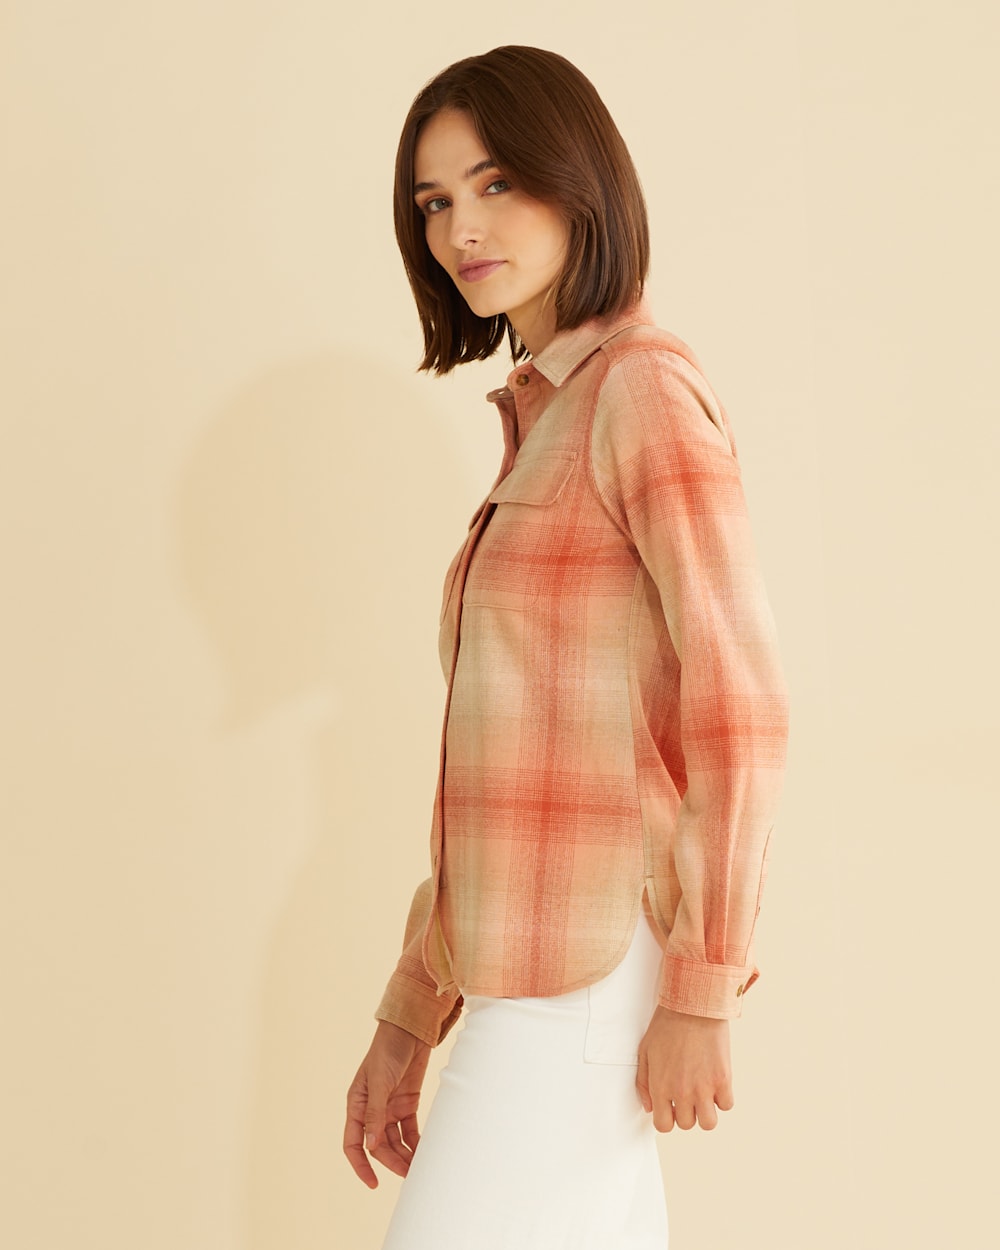 ALTERNATE VIEW OF WOMEN'S BOARD SHIRT IN APRICOT OMBRE image number 5